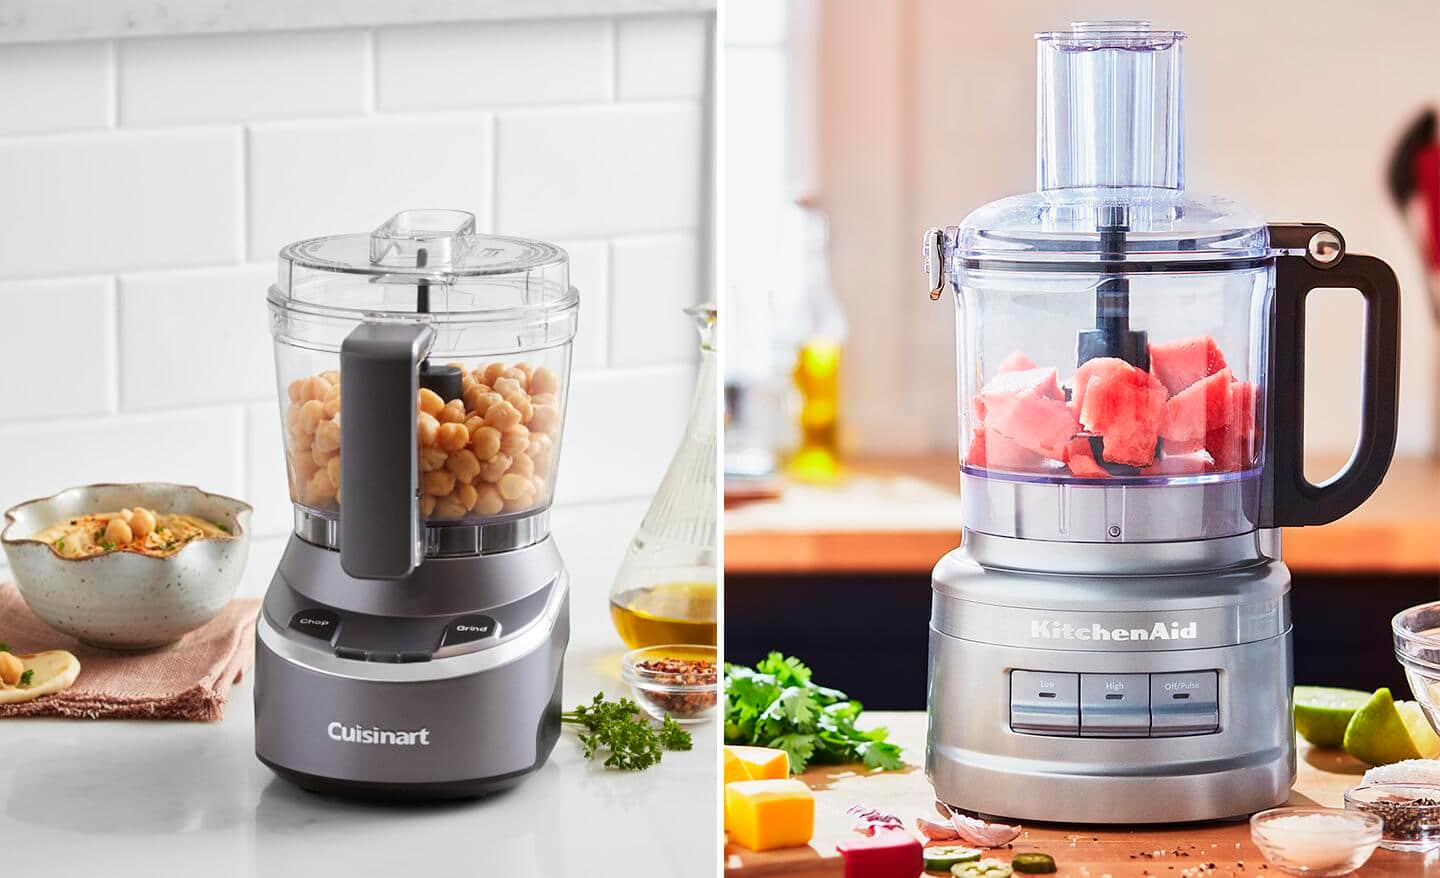 Two food processors on kitchen counters